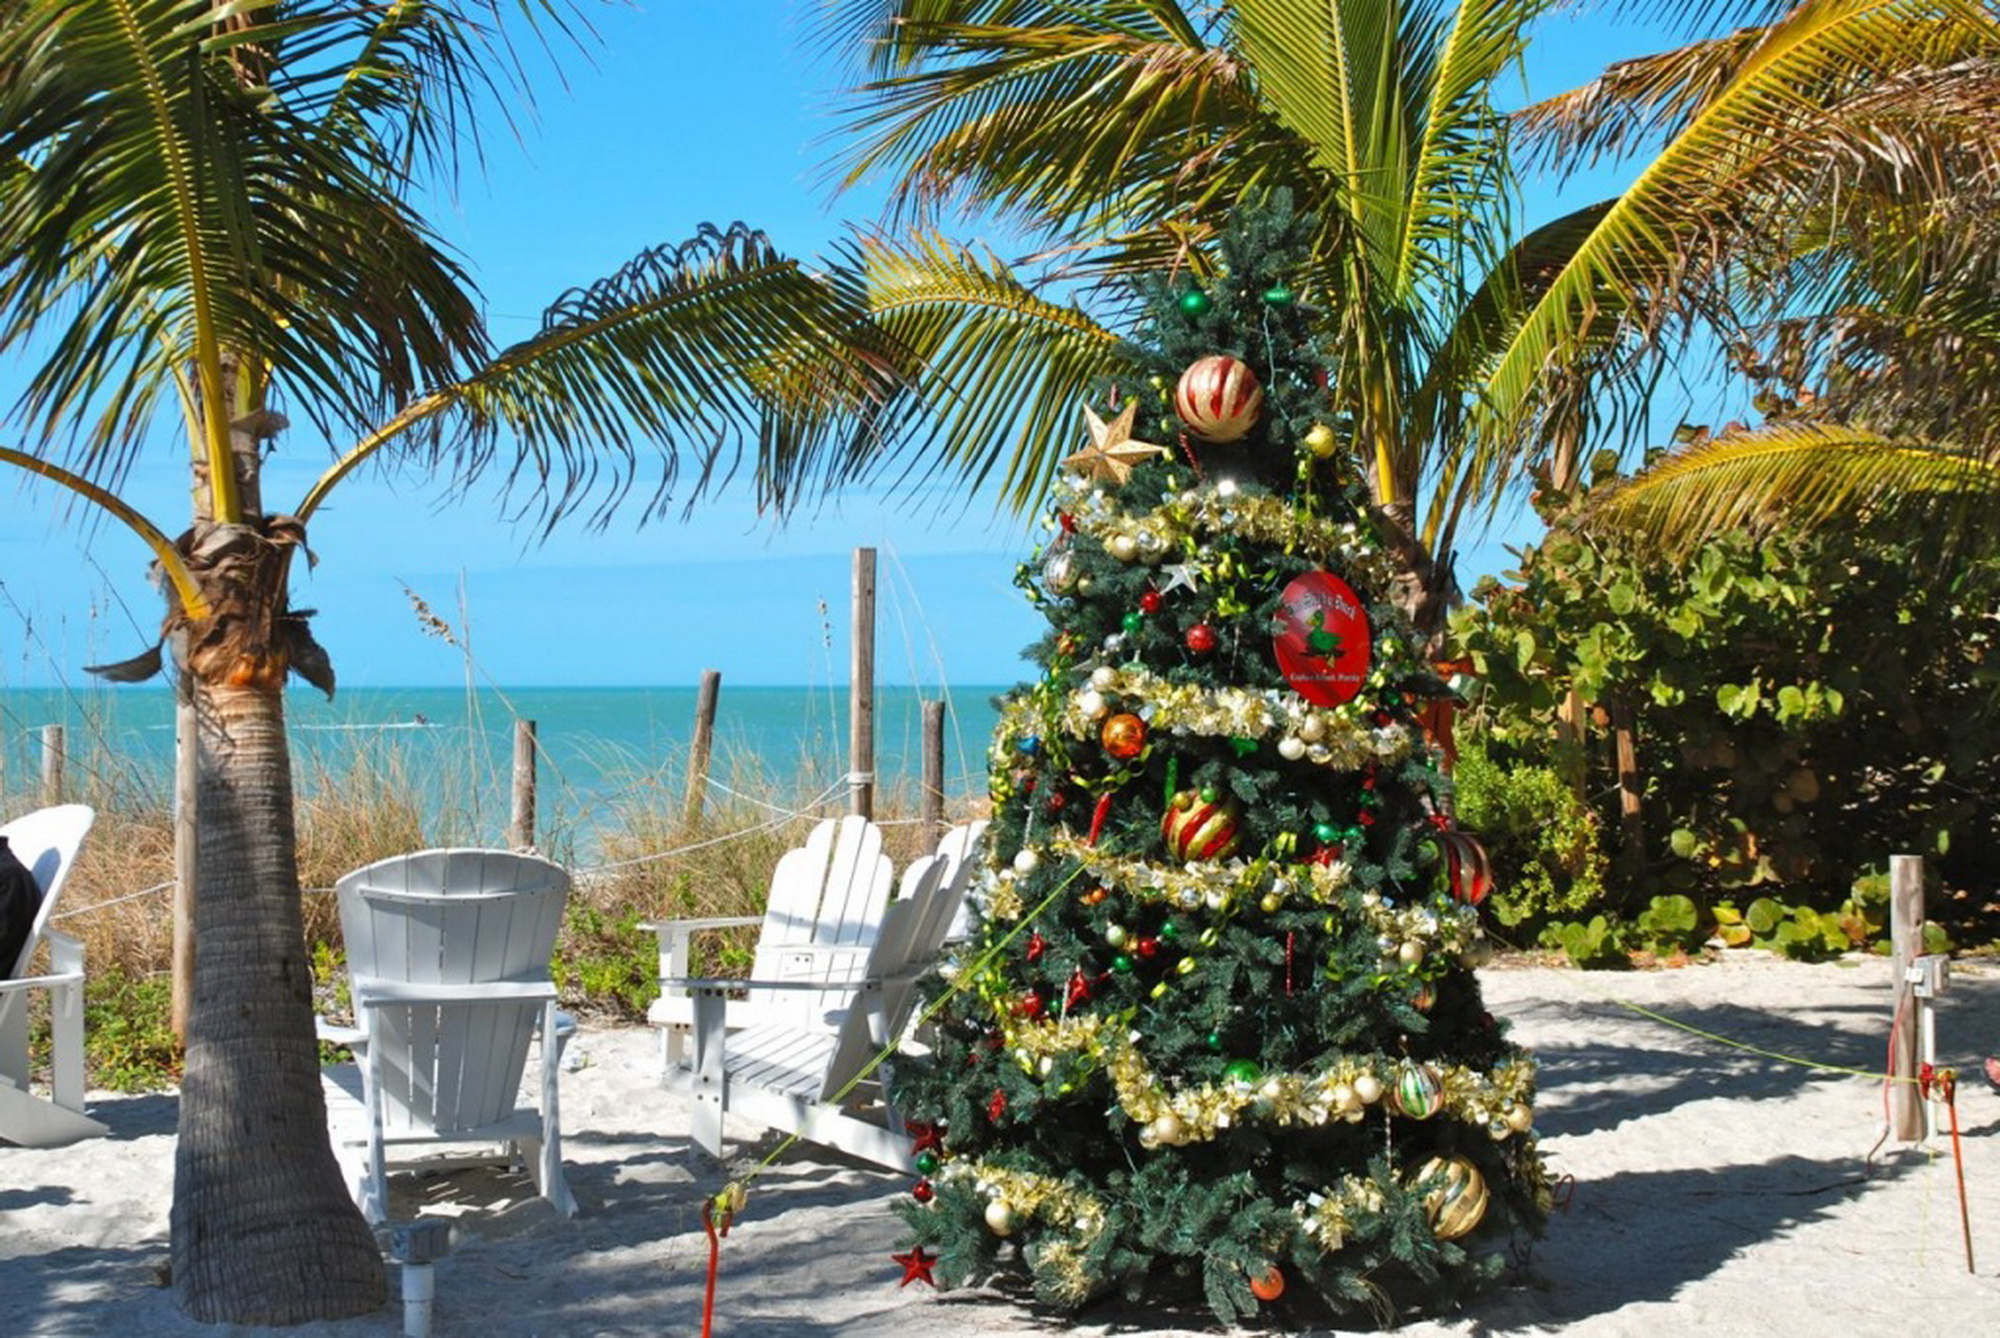 South Florida Vacation Rental Accommodations During The Holidays 1 Hotel Accidents South Florida Injury Law Firm